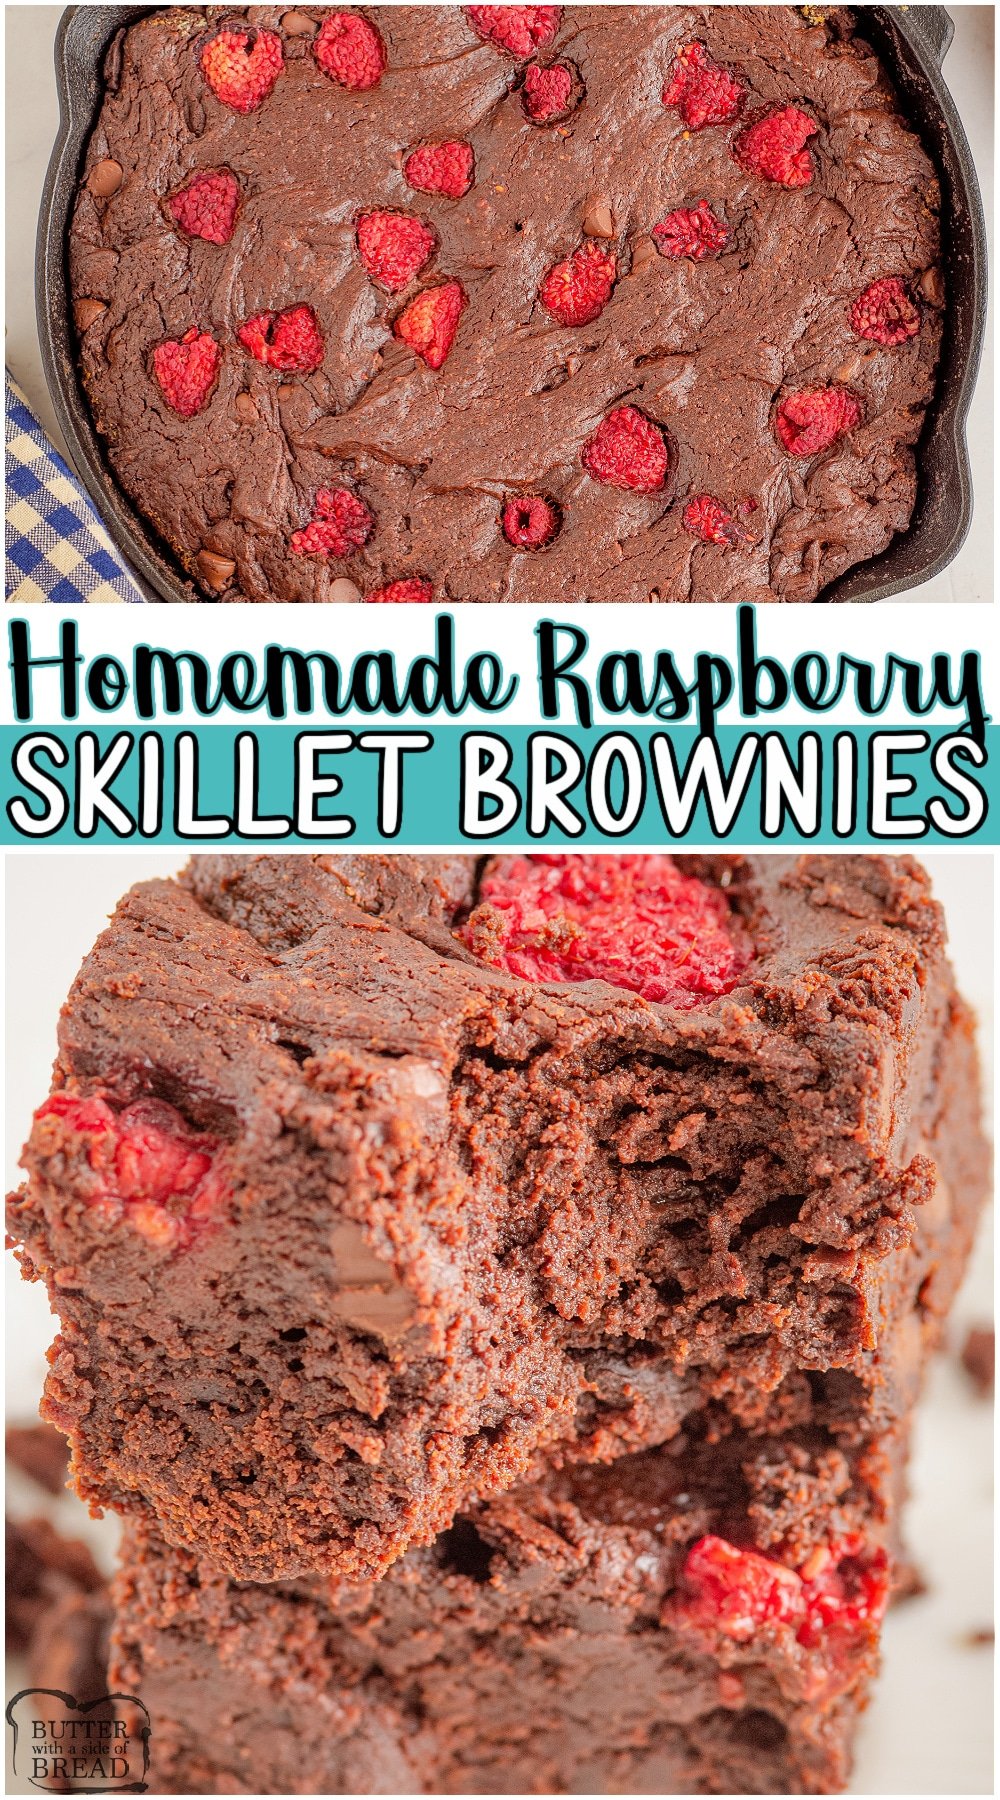 Homemade Raspberry skillet brownies made with classic ingredients for rich, fudgy brownies with fresh raspberries! Classic skillet brownie recipe topped with raspberries for a decadent treat! #brownies #skillet #castiron #raspberries #baking #chocolate #easyrecipe from BUTTER WITH A SIDE OF BREAD